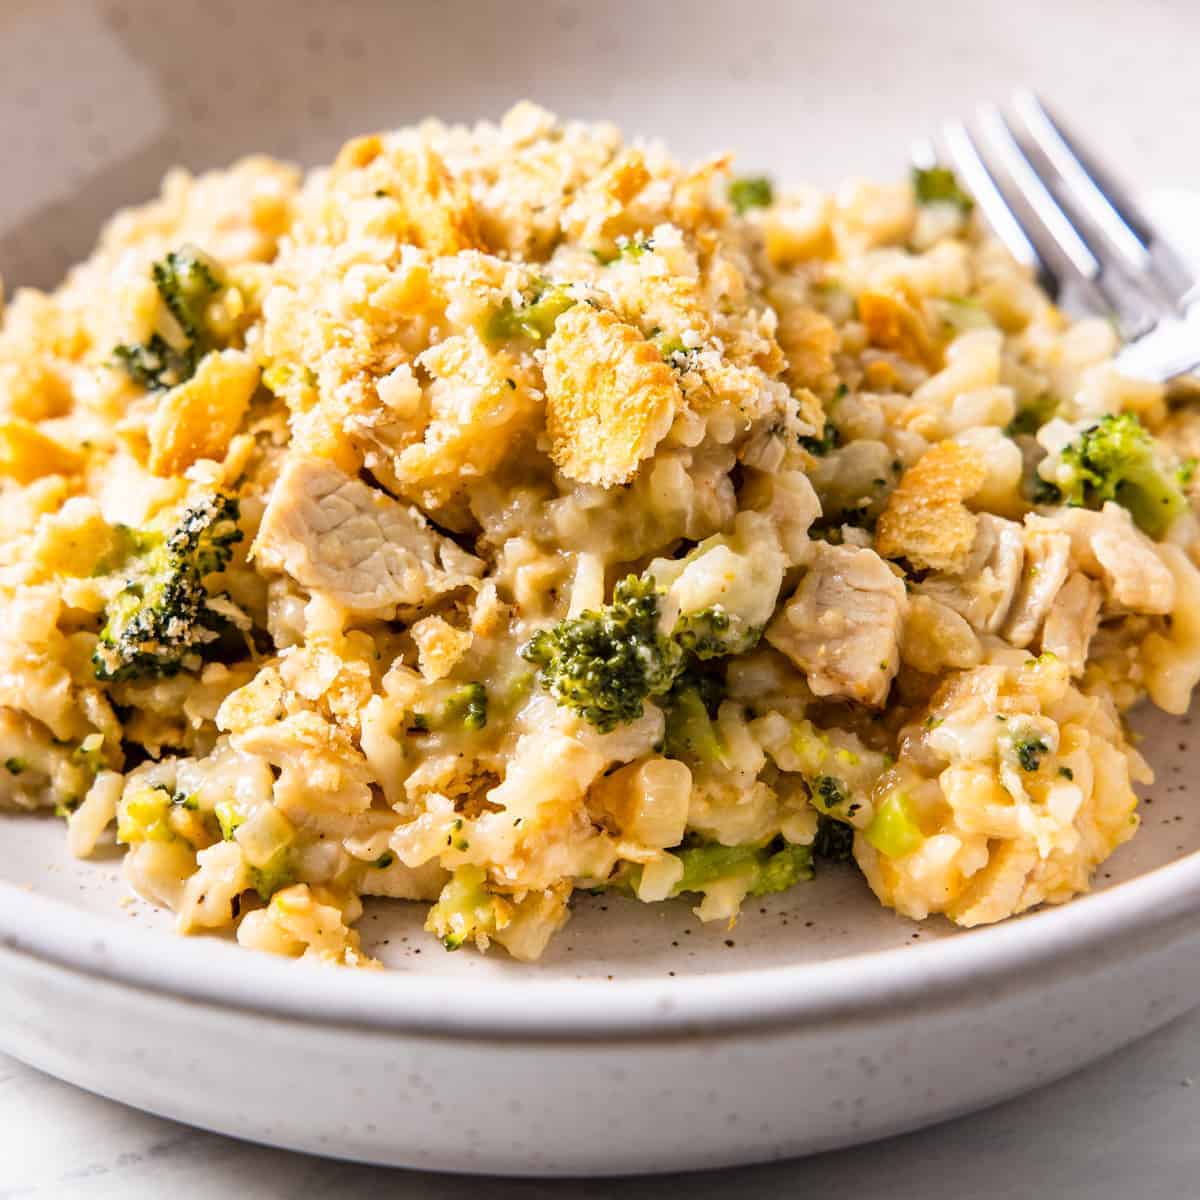 Close up image of a serving of chicken rice and broccoli casserole.